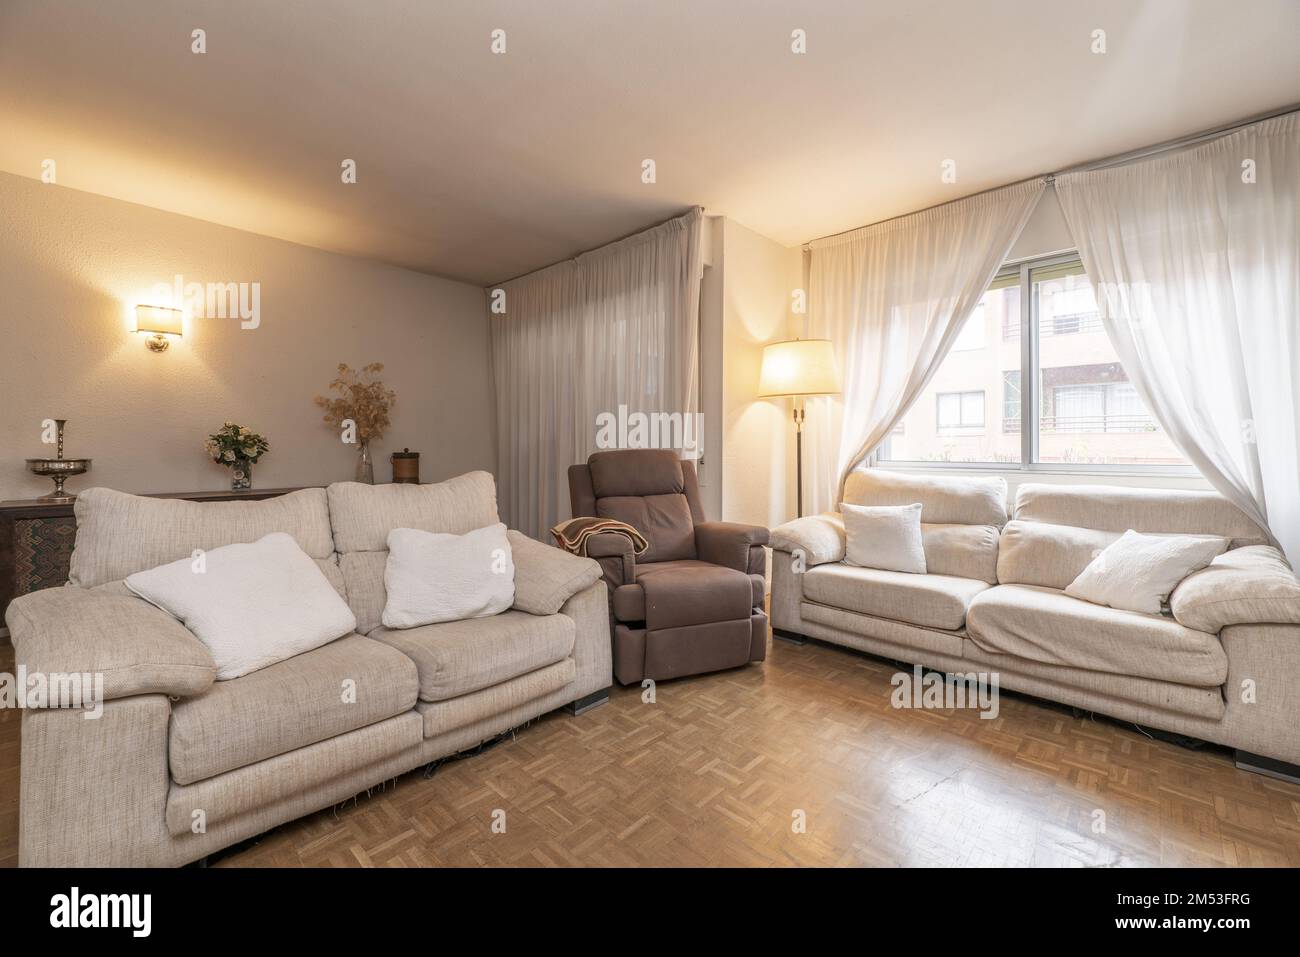 Corner of a living room with twin armchairs upholstered in beige fabric and a massage chair in the middle Stock Photo